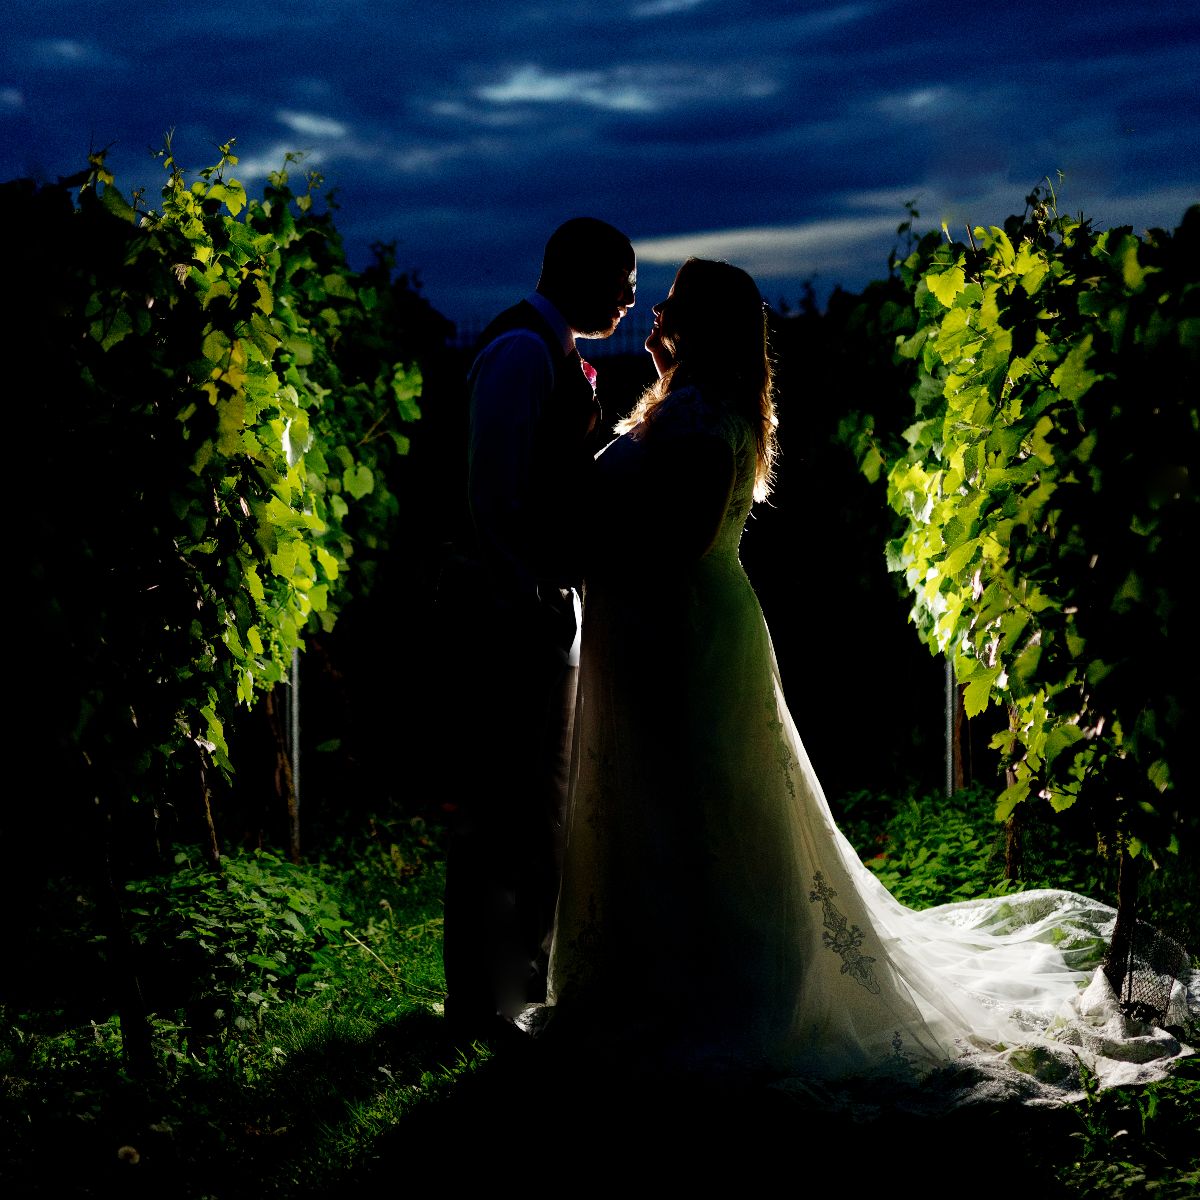 A sneaky kiss in the vineyard